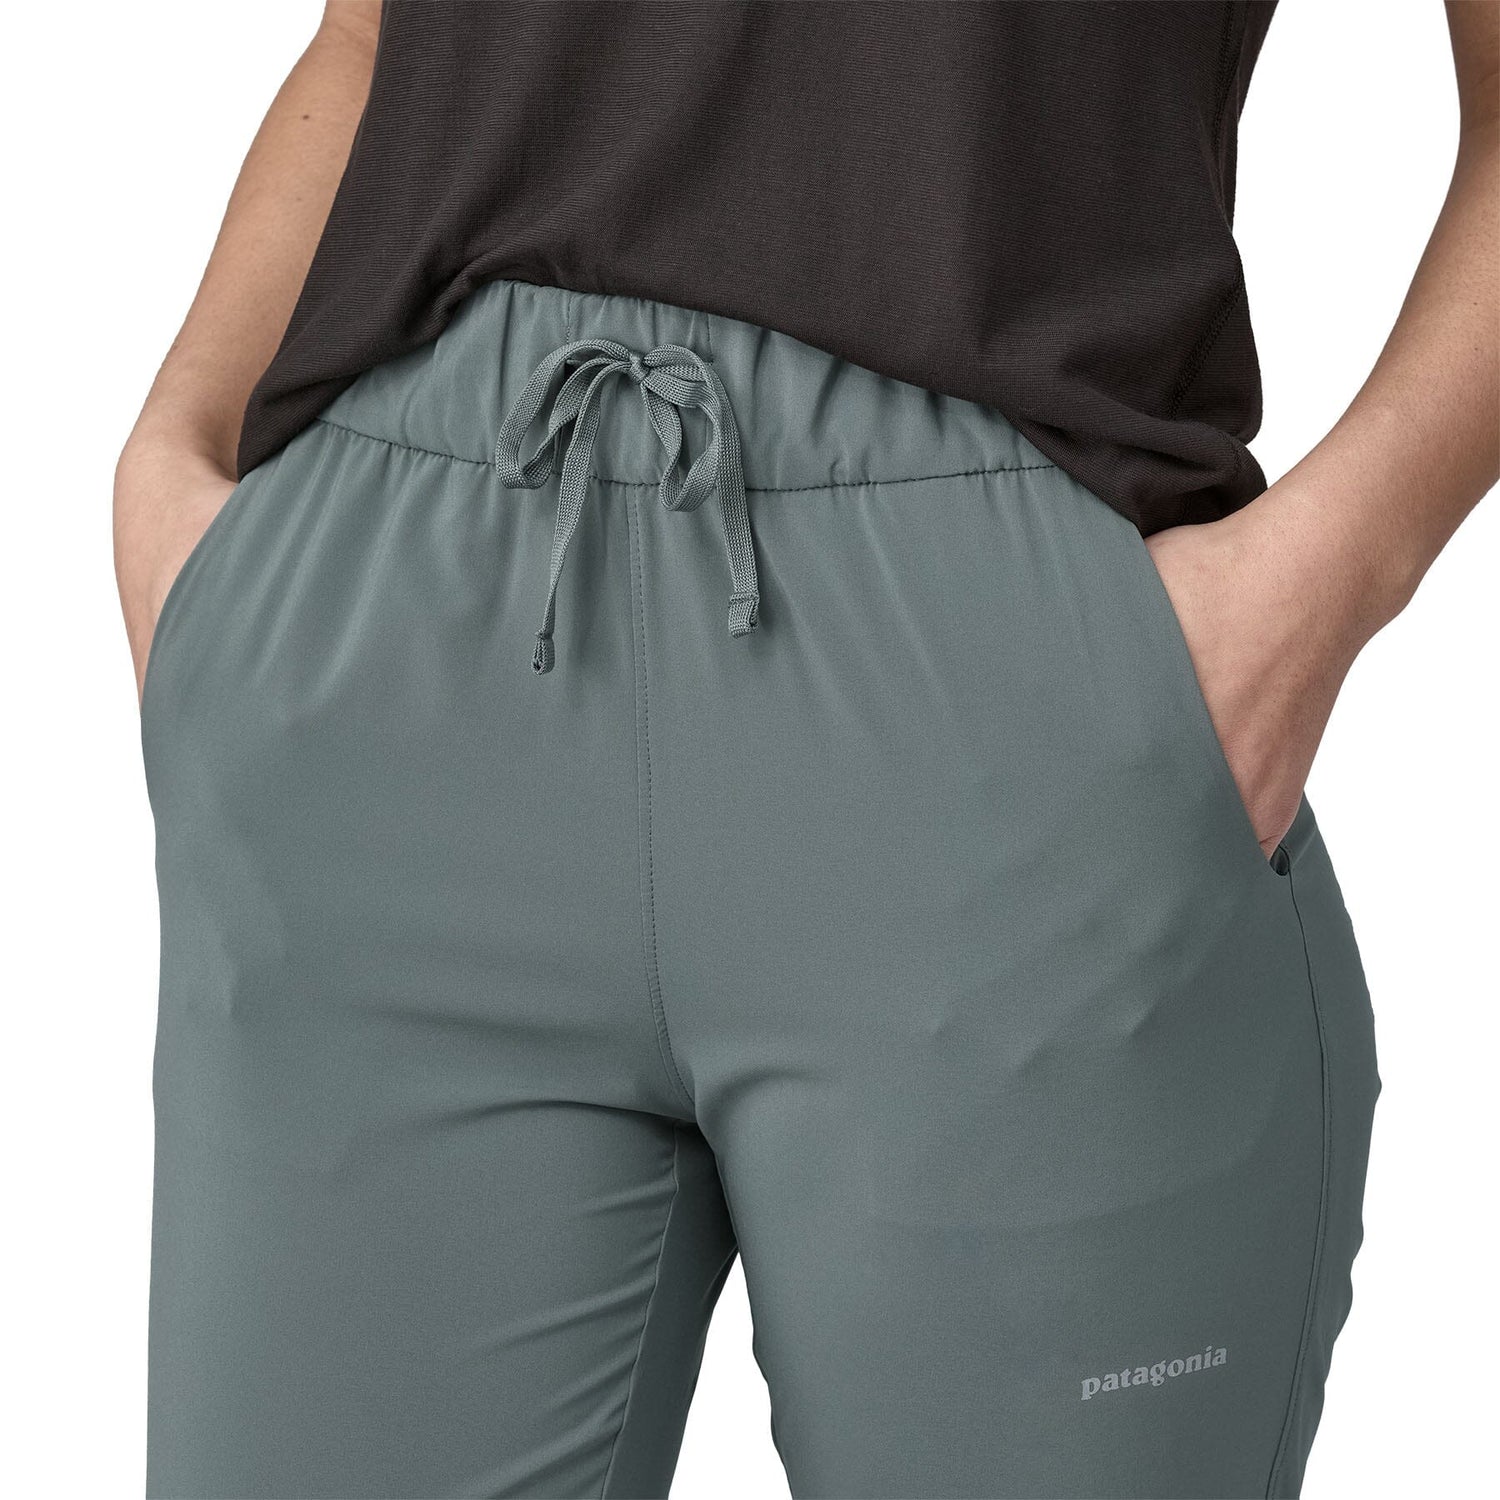 Patagonia W's Terrebonne Joggers - Recycled polyester Lose It: Nouveau Green Pants